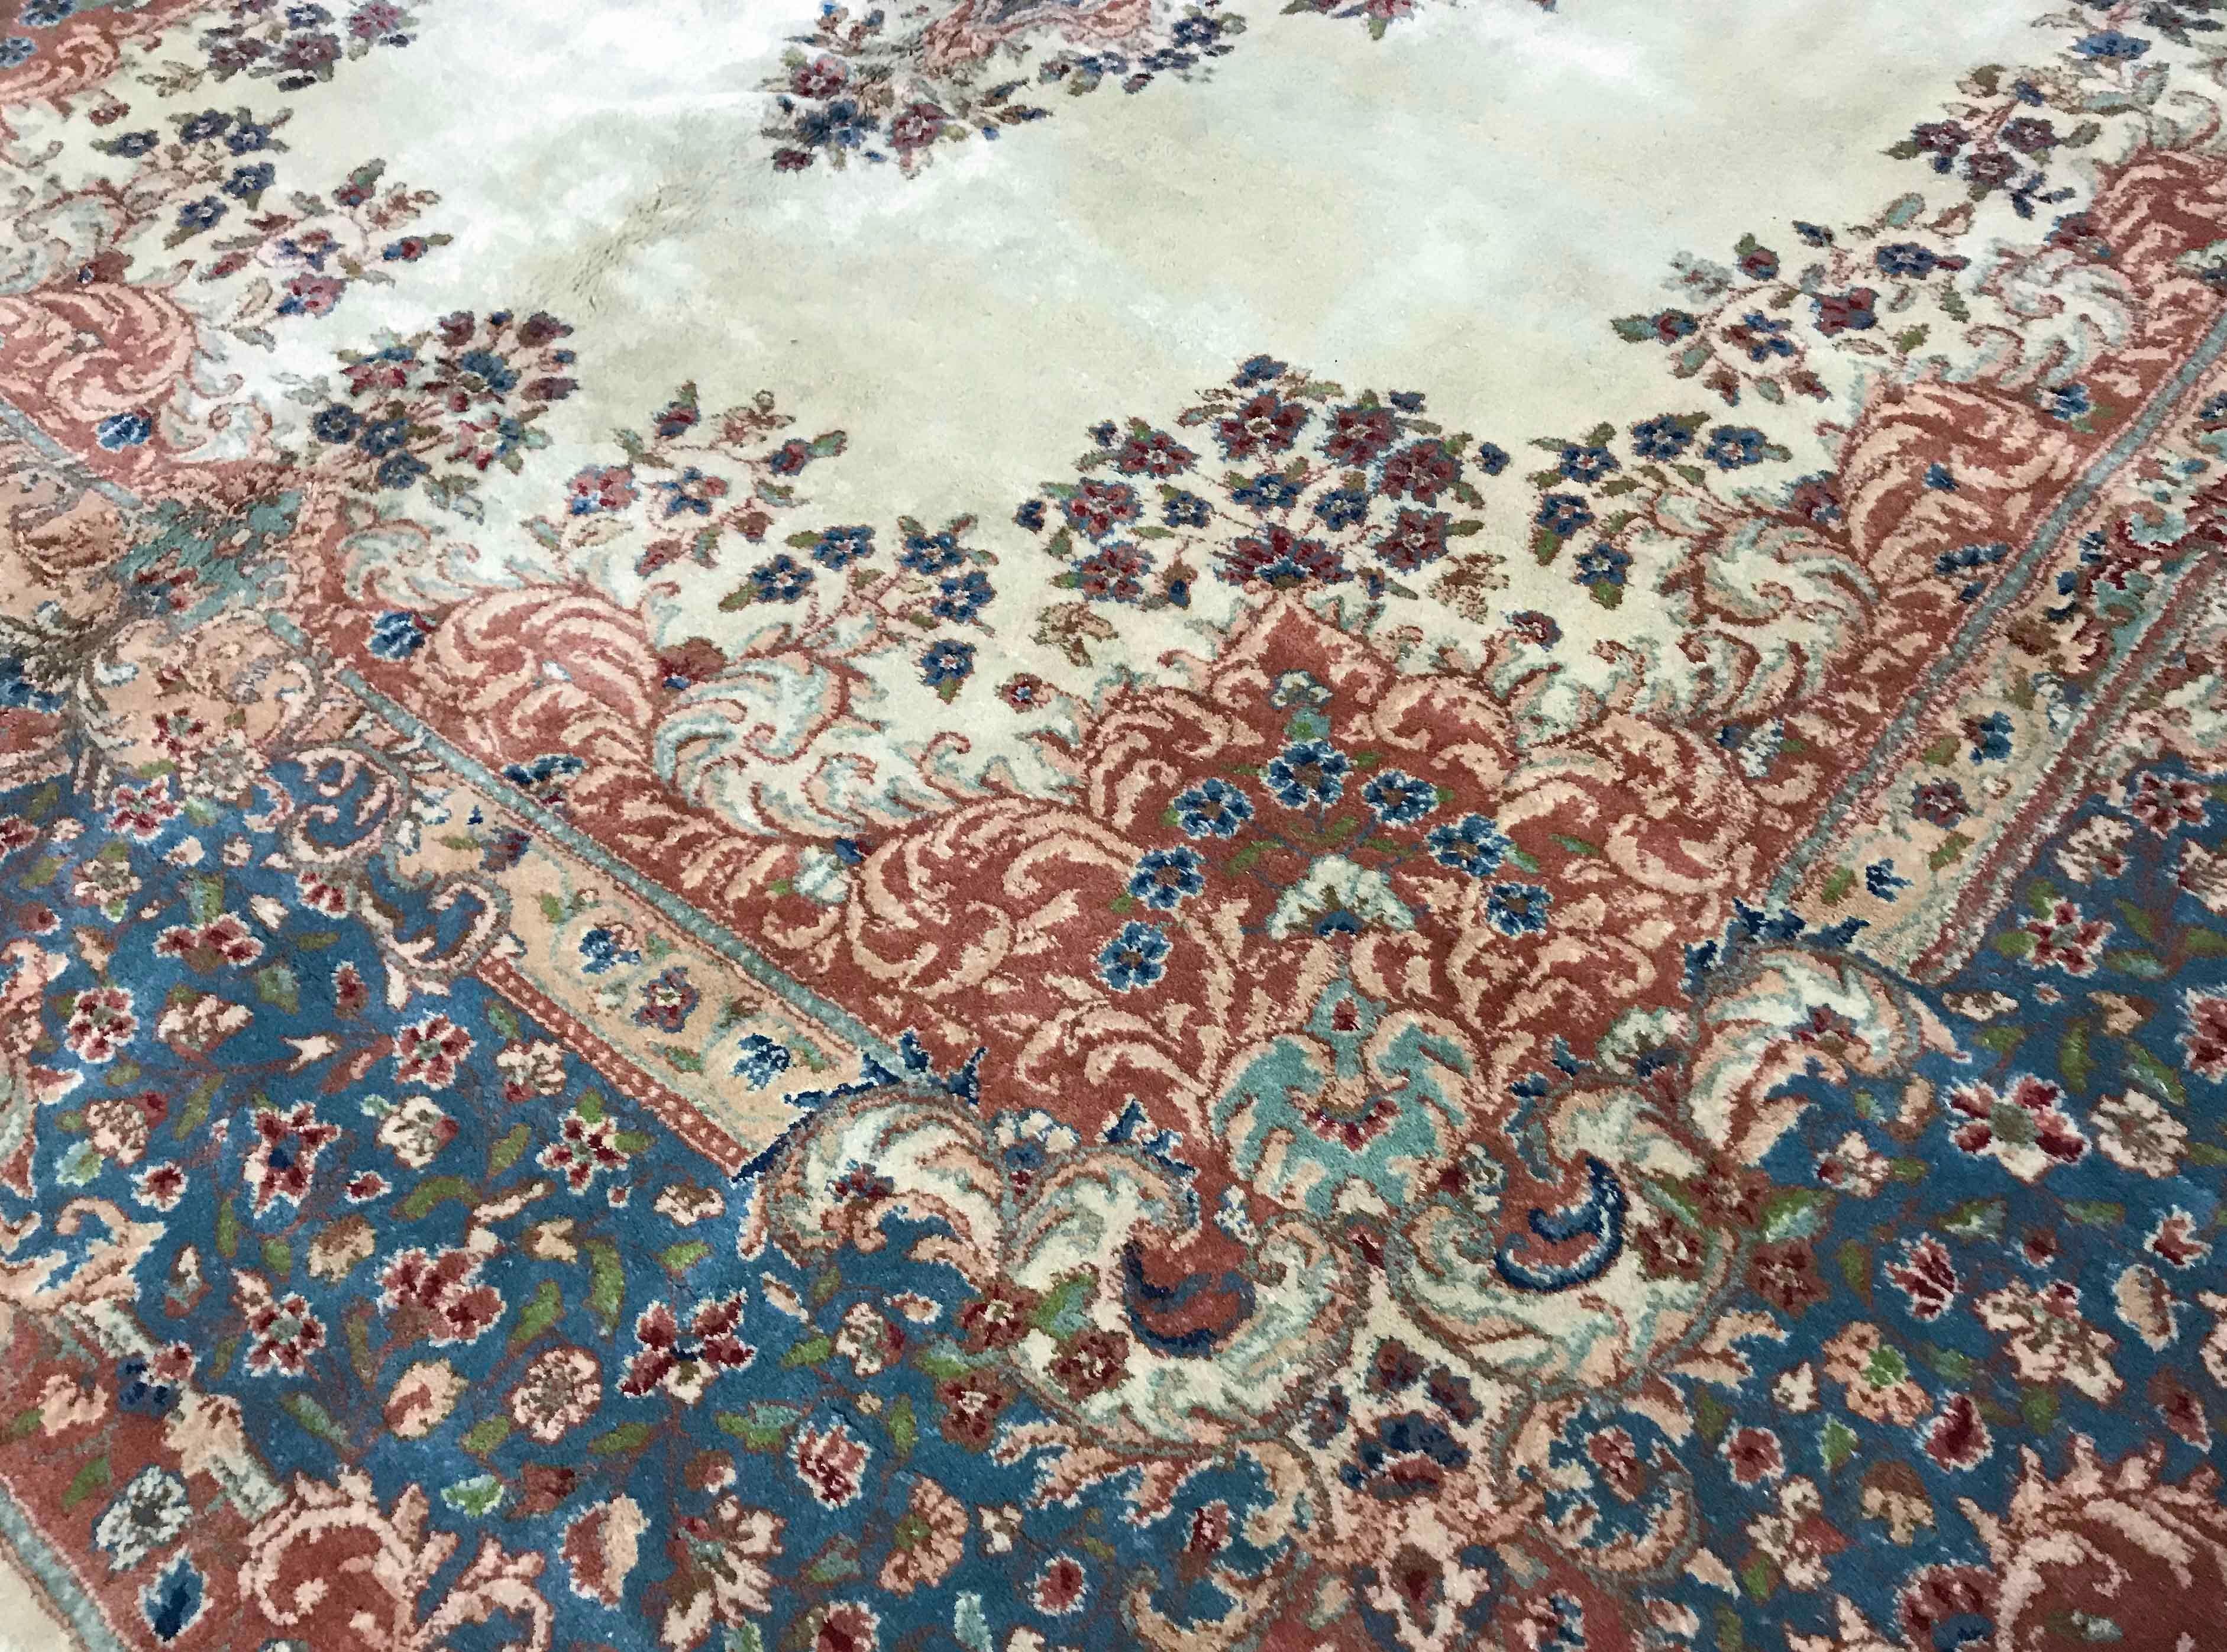 Vintage Persian Kerman, circa 1940. This attractive oversized Kerman has an ivory ground enclosing a central floral design in soft pastel blues with a floral theme surrounding the central field; the main border continues the soft blue colors and